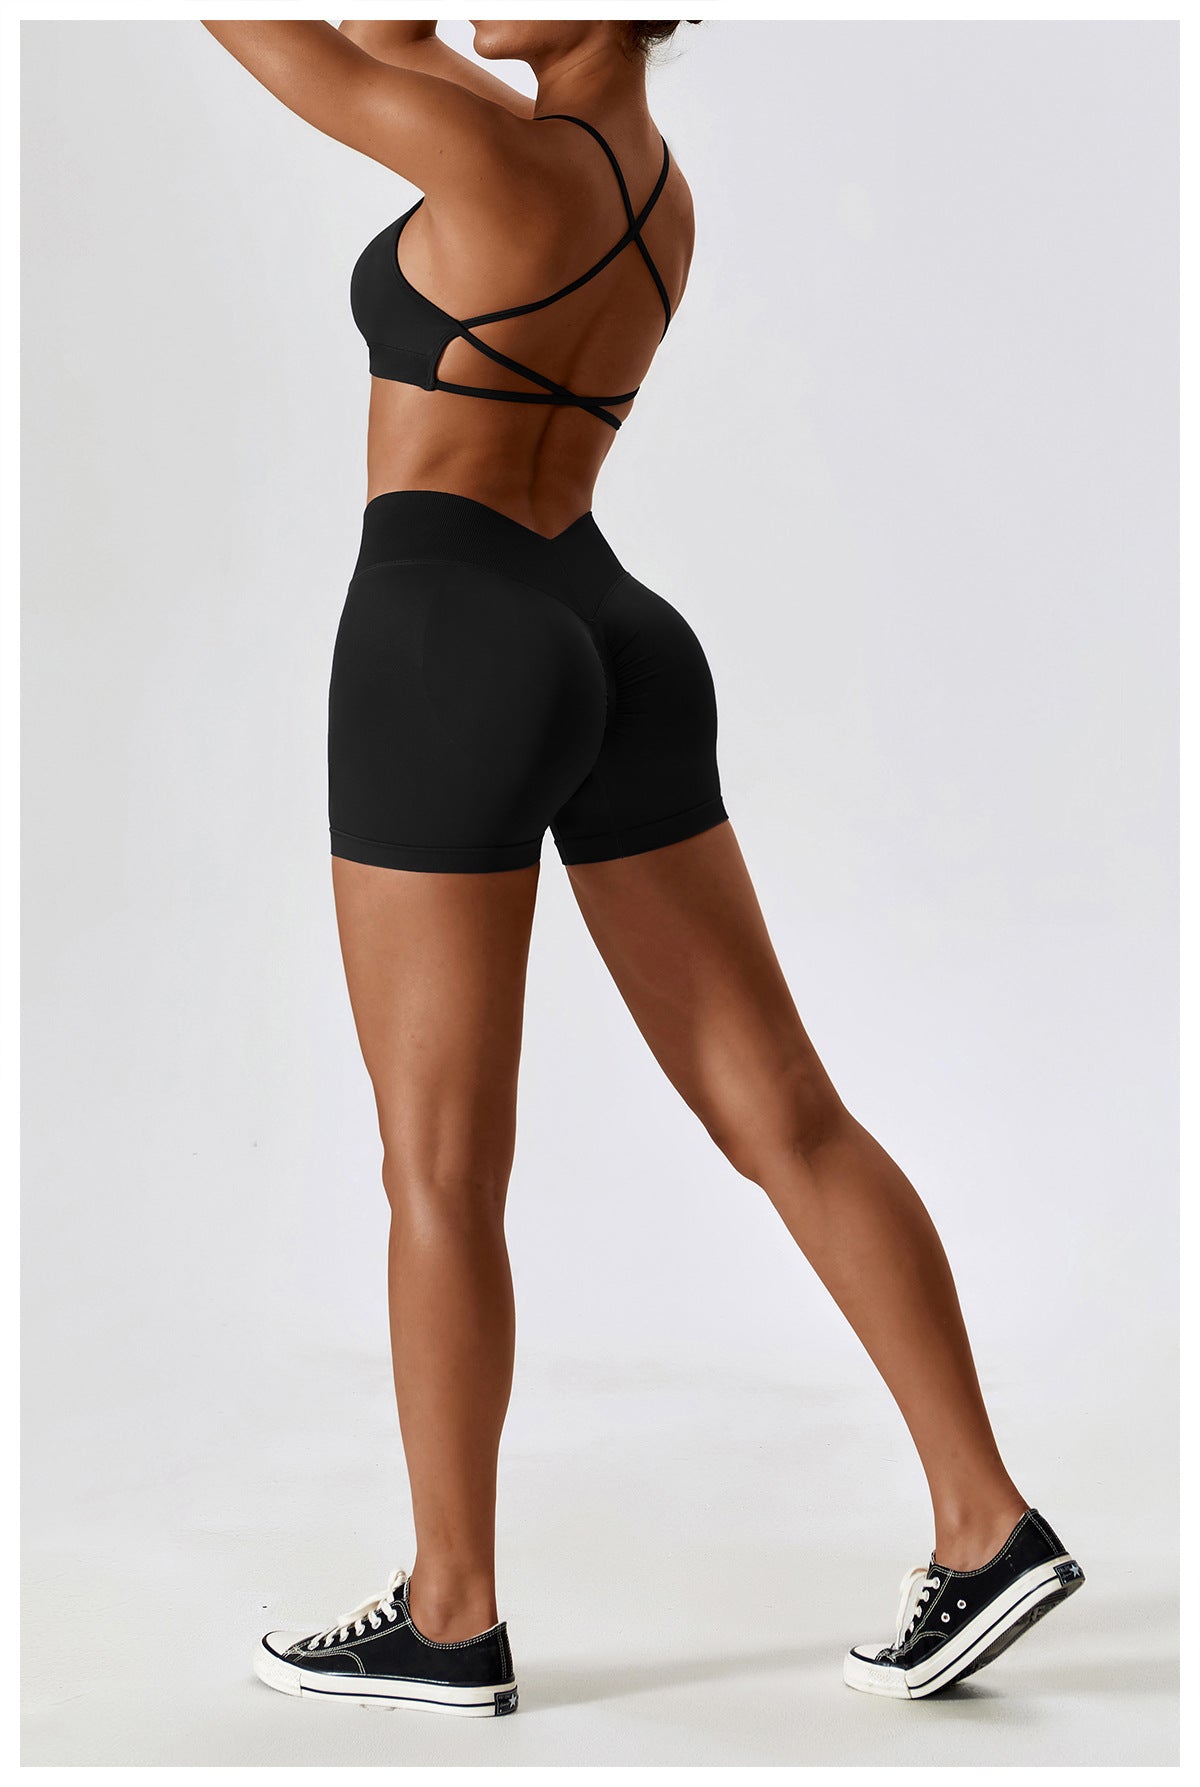 23.07 seamless yoga suit running quick-drying tight-fitting sports fitness suit female 7137